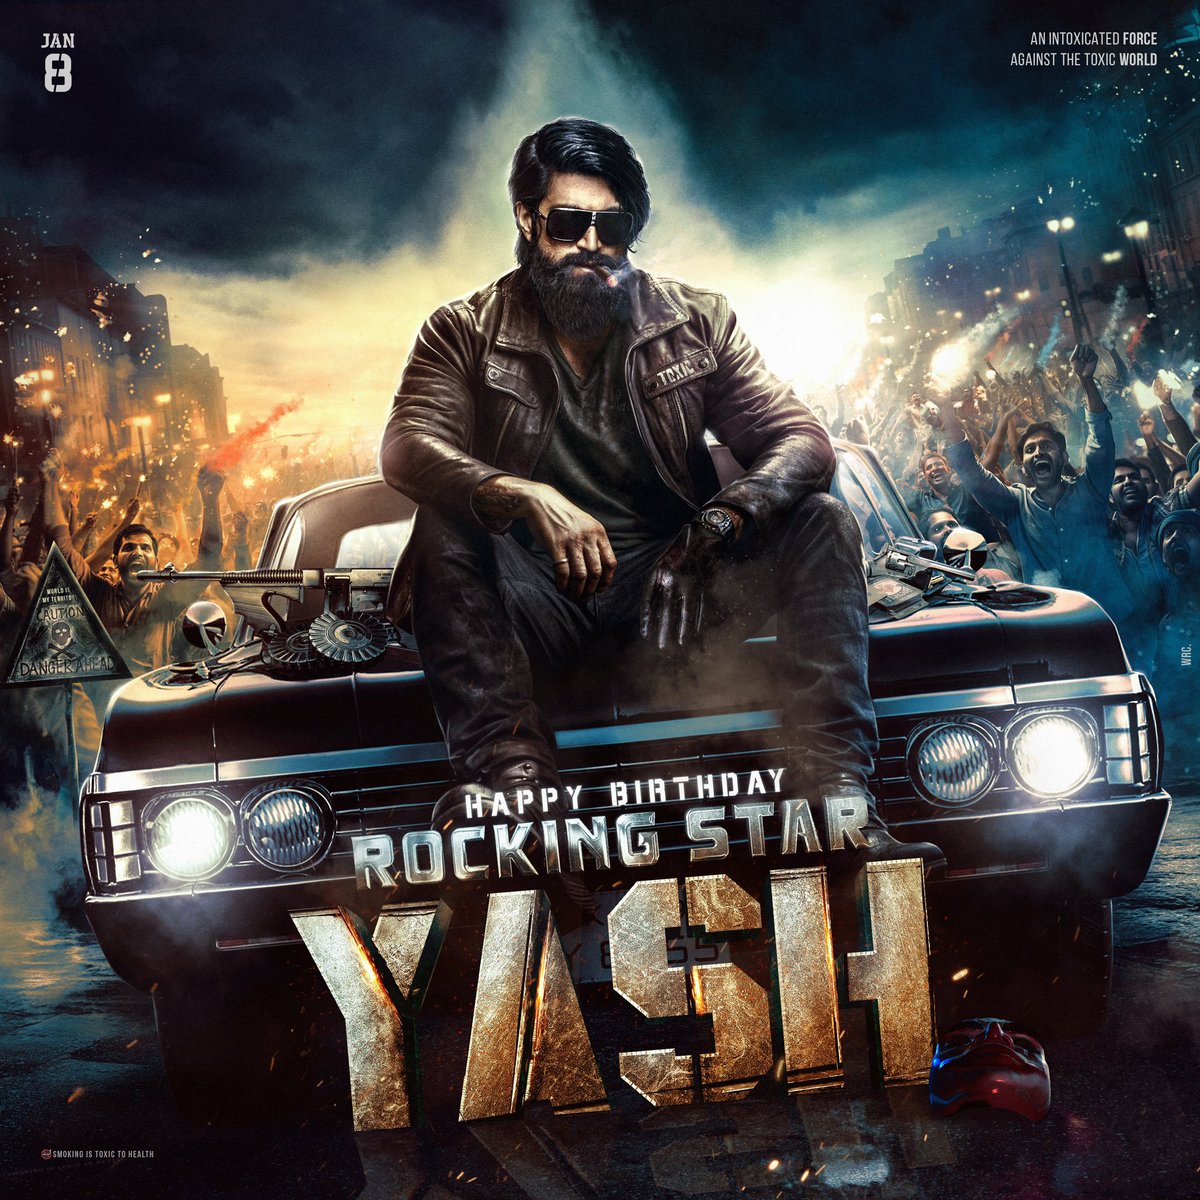 #YashBirthdayCDP 
Advance birthday wishes to our Rocking Star Yash. And waiting for #TOXIC first look #Yash19 #YashBOSS𓃵